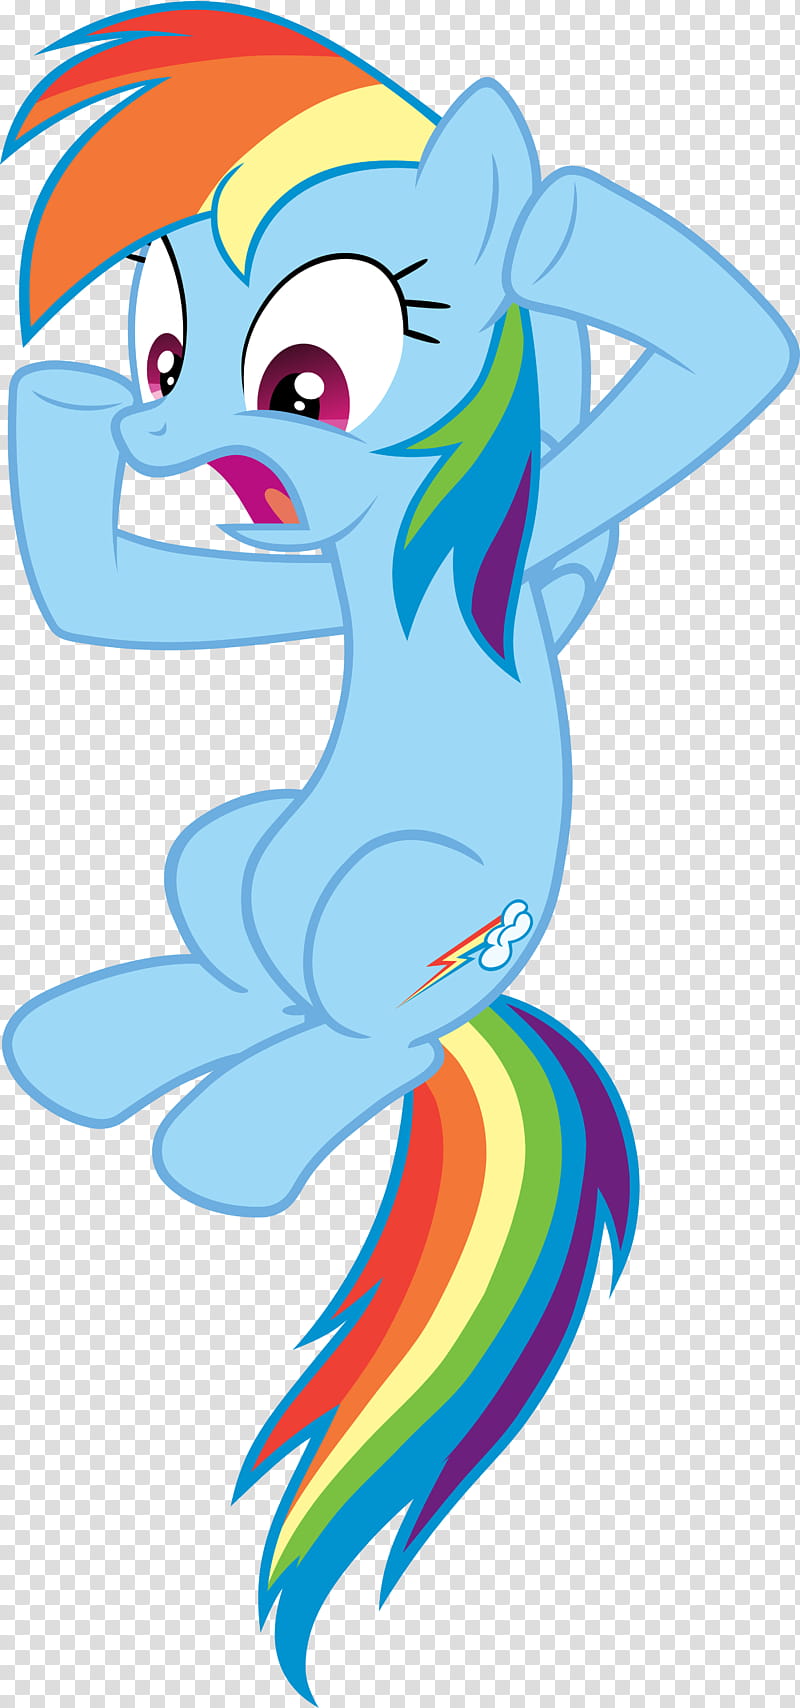 Shocked Rainbow Dash, My Little Pony character transparent background PNG clipart